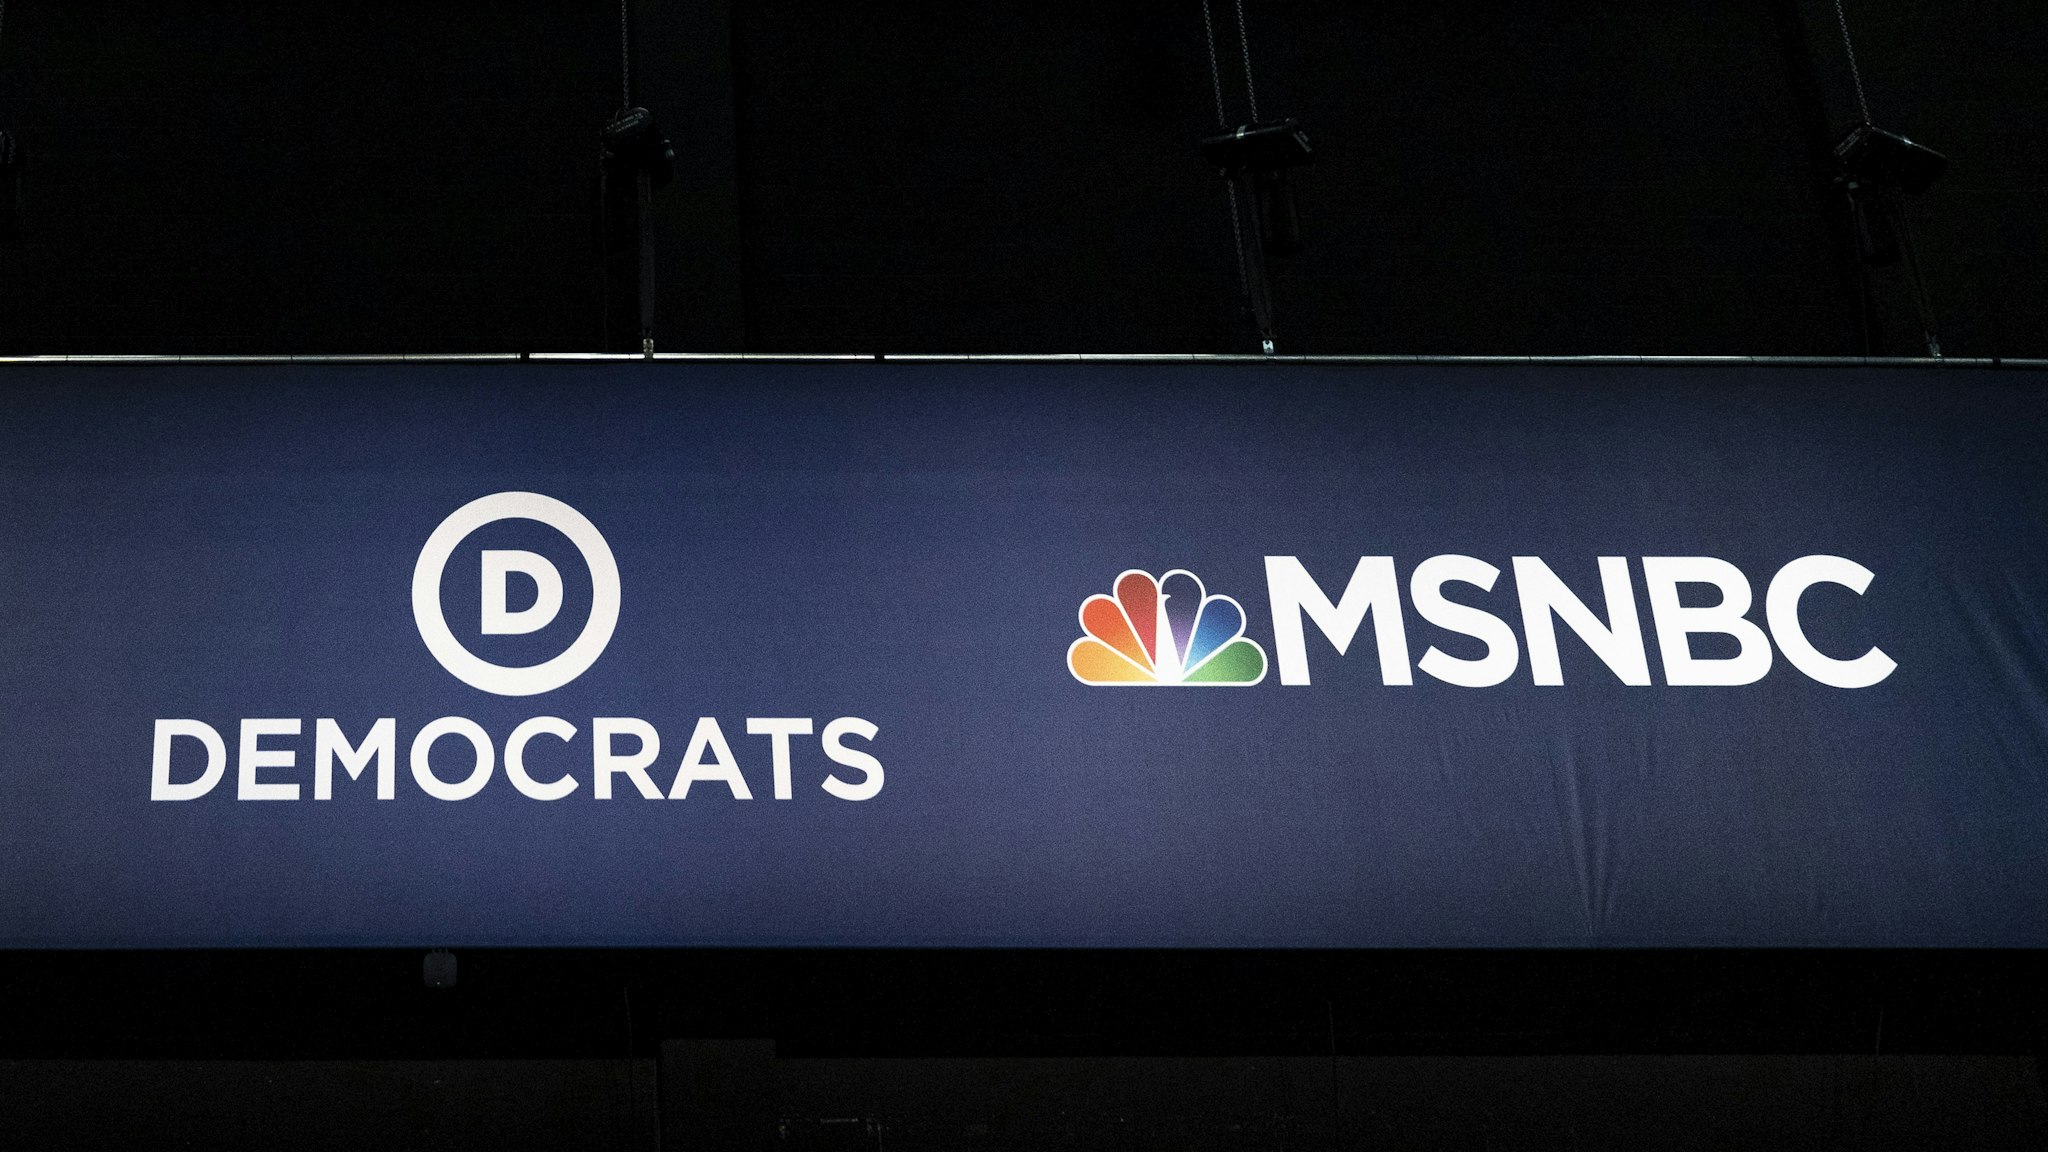 MIAMI, FL - JUNE 25: Advertising signage for NBC News and the Democratic Party is seen inside the media filing center at Adrienne Arsht Center for the Performing Arts where the first Democratic presidential primary debates for the 2020 elections will take place, June 25, 2019 in Miami, Florida.